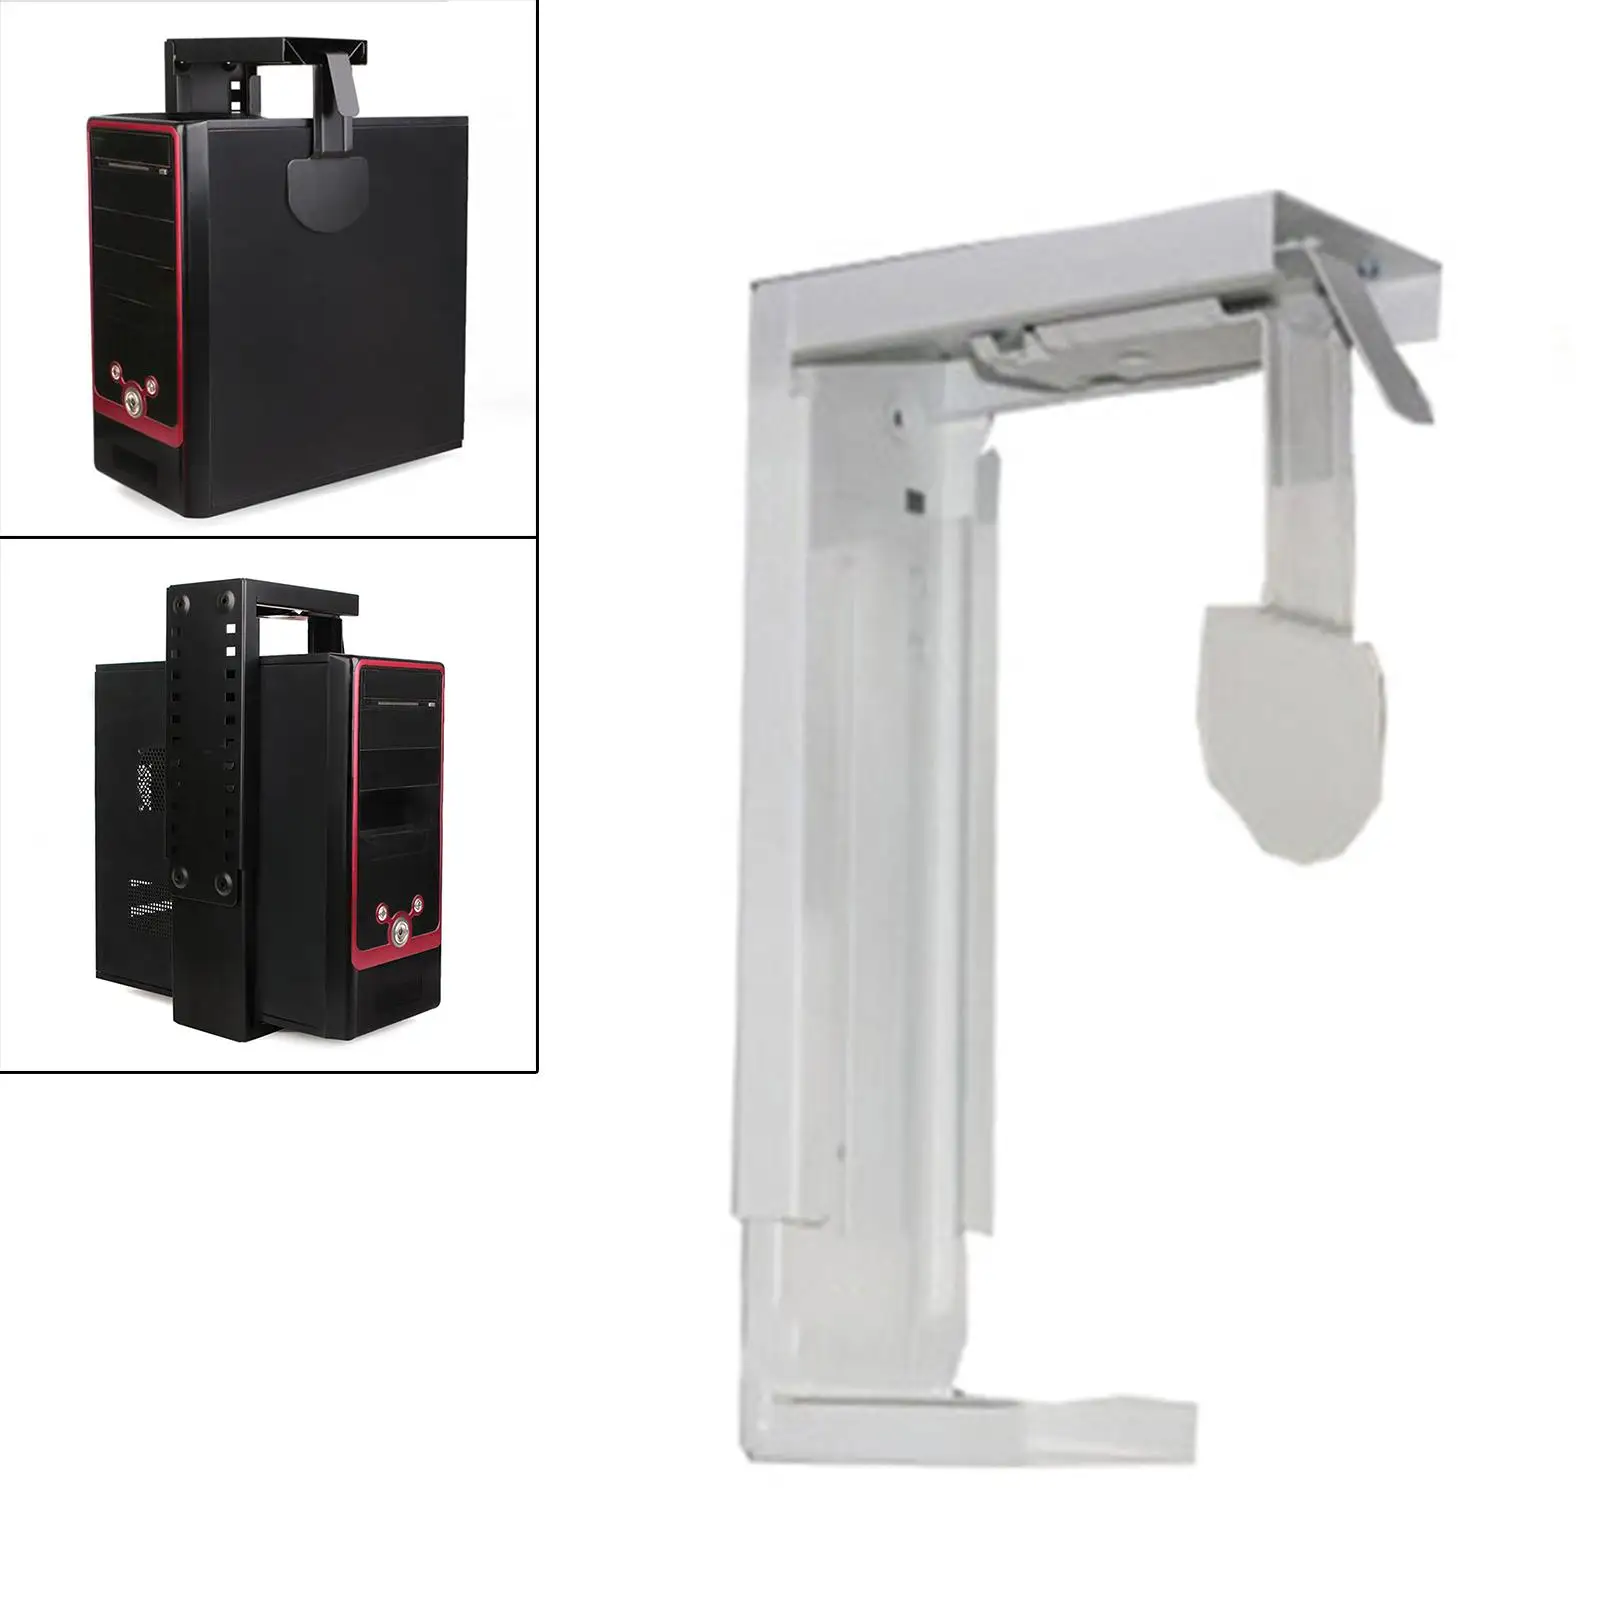  Holder Hanging Rack  Mainframe Box Hanger for Computers Supplies